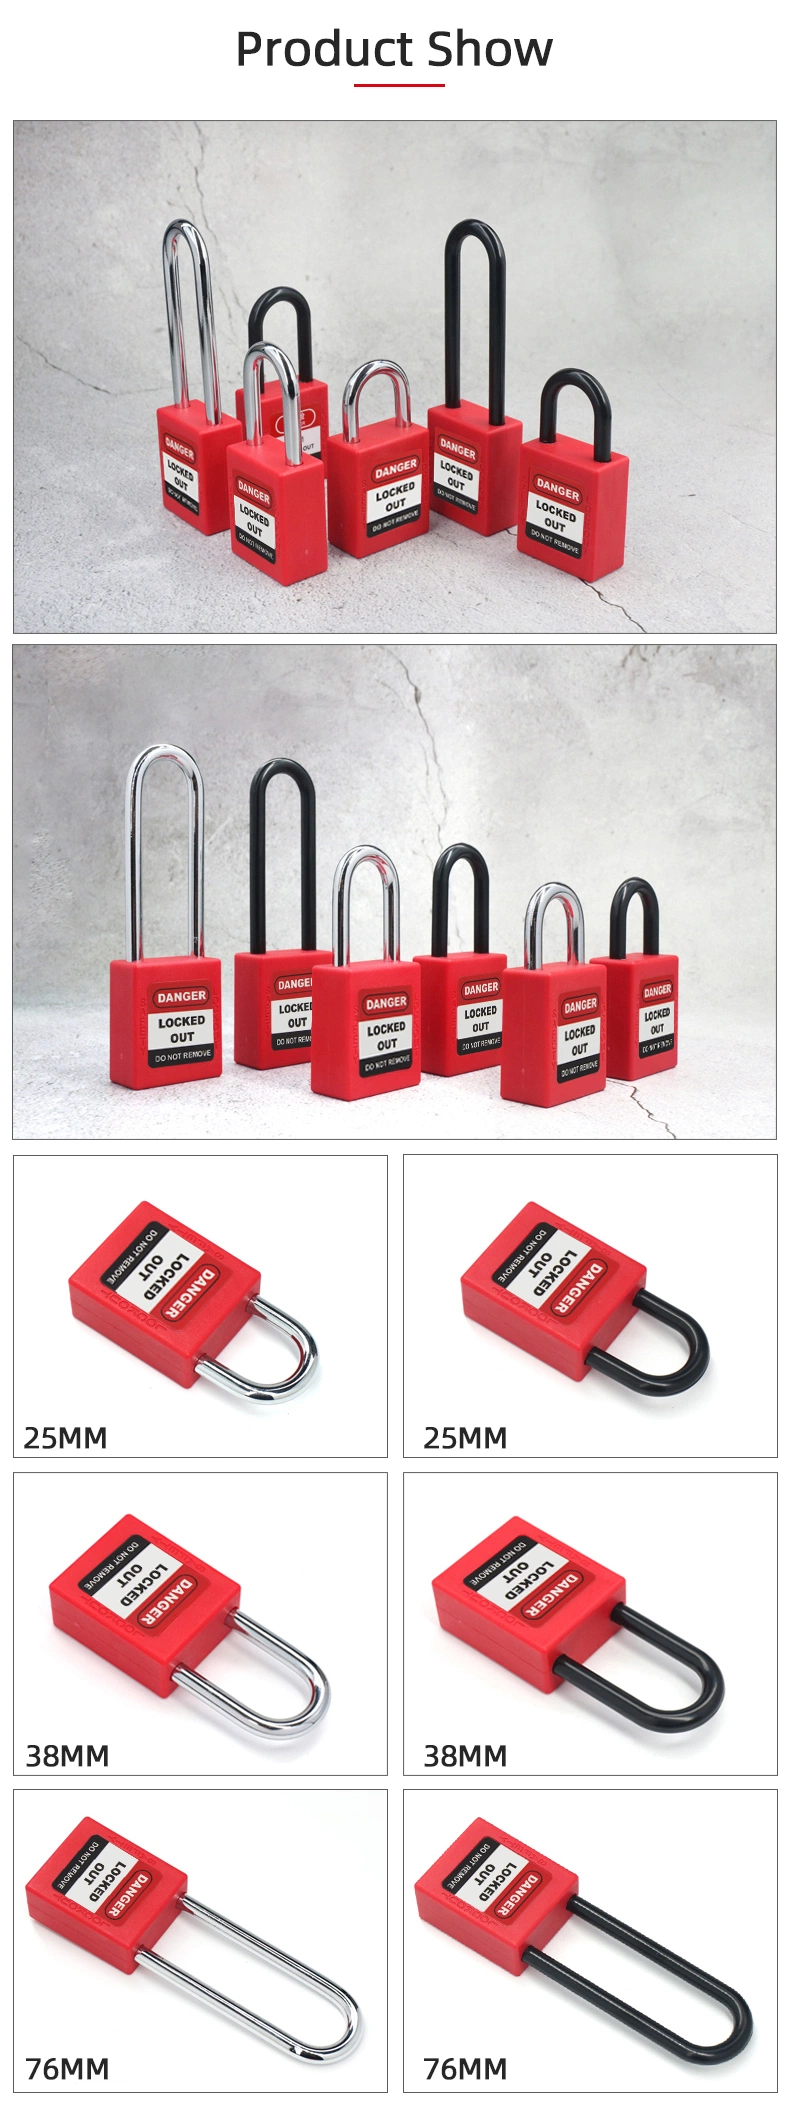 38mm Plastic Shackle Long Lock Body Safety Padlock Lockout Tagout